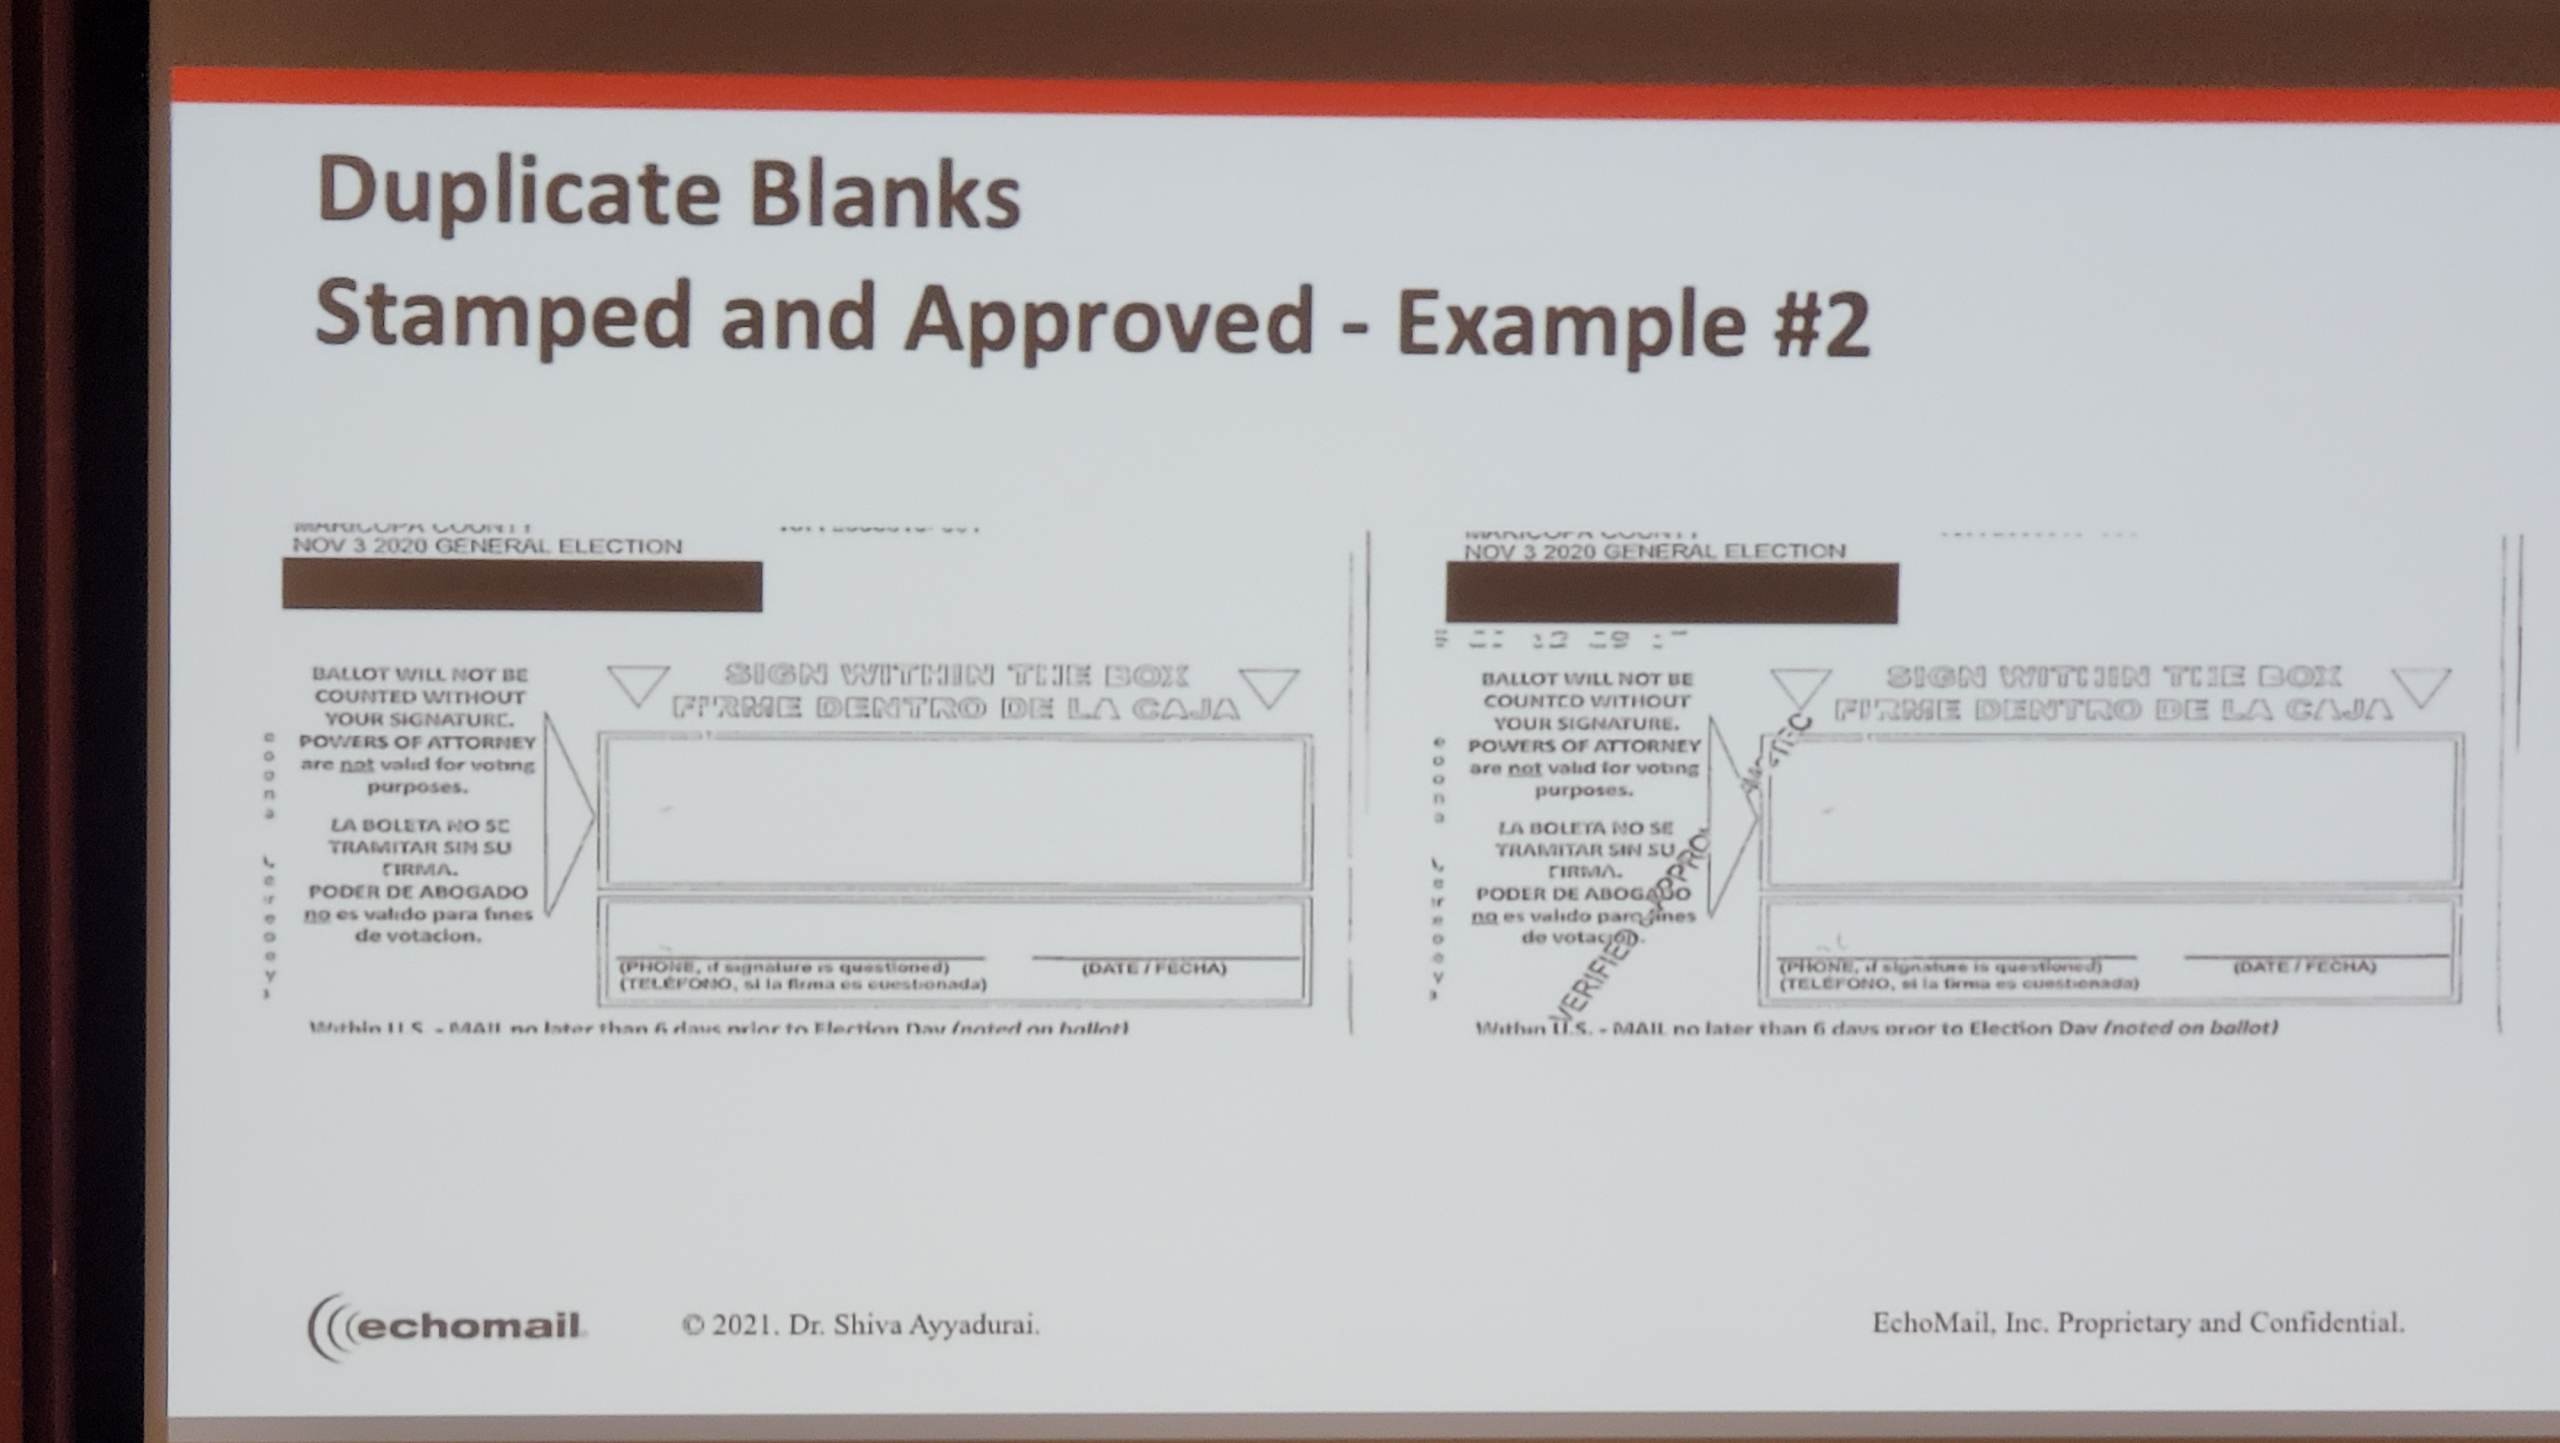  AZ Audit Finds Proof of Pre-Meditated Fraud: Multiple Ballots Had “Verified and Approved” Stamp PRE-PRINTED BEHIND Signature Box